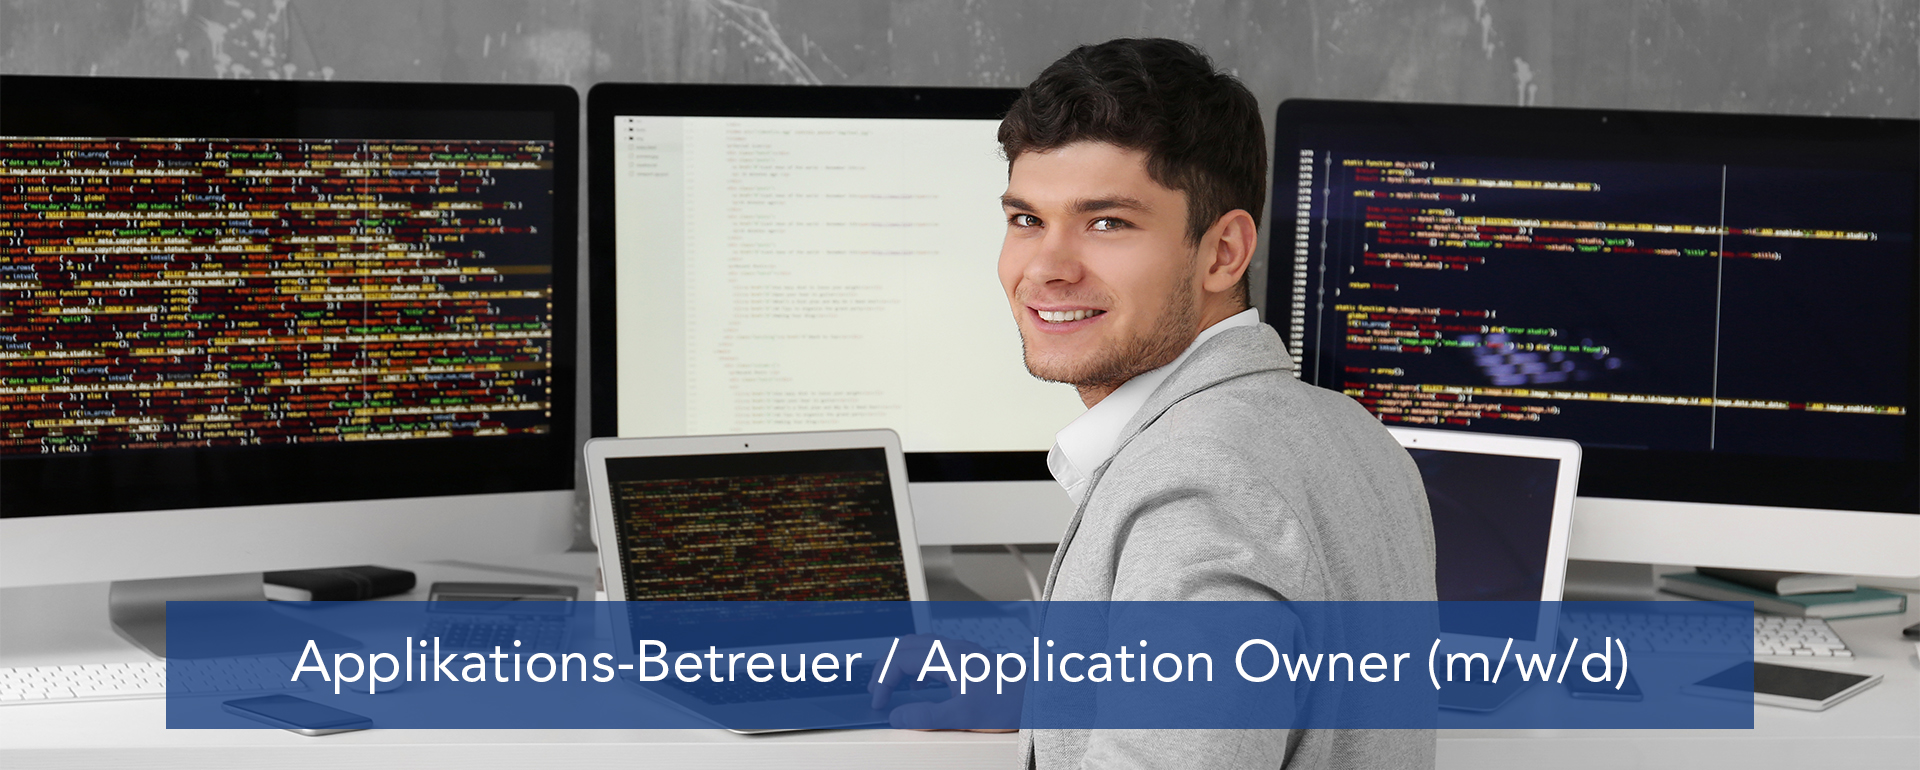 Applikations-Betreuer / Application Owner (m/w/d)